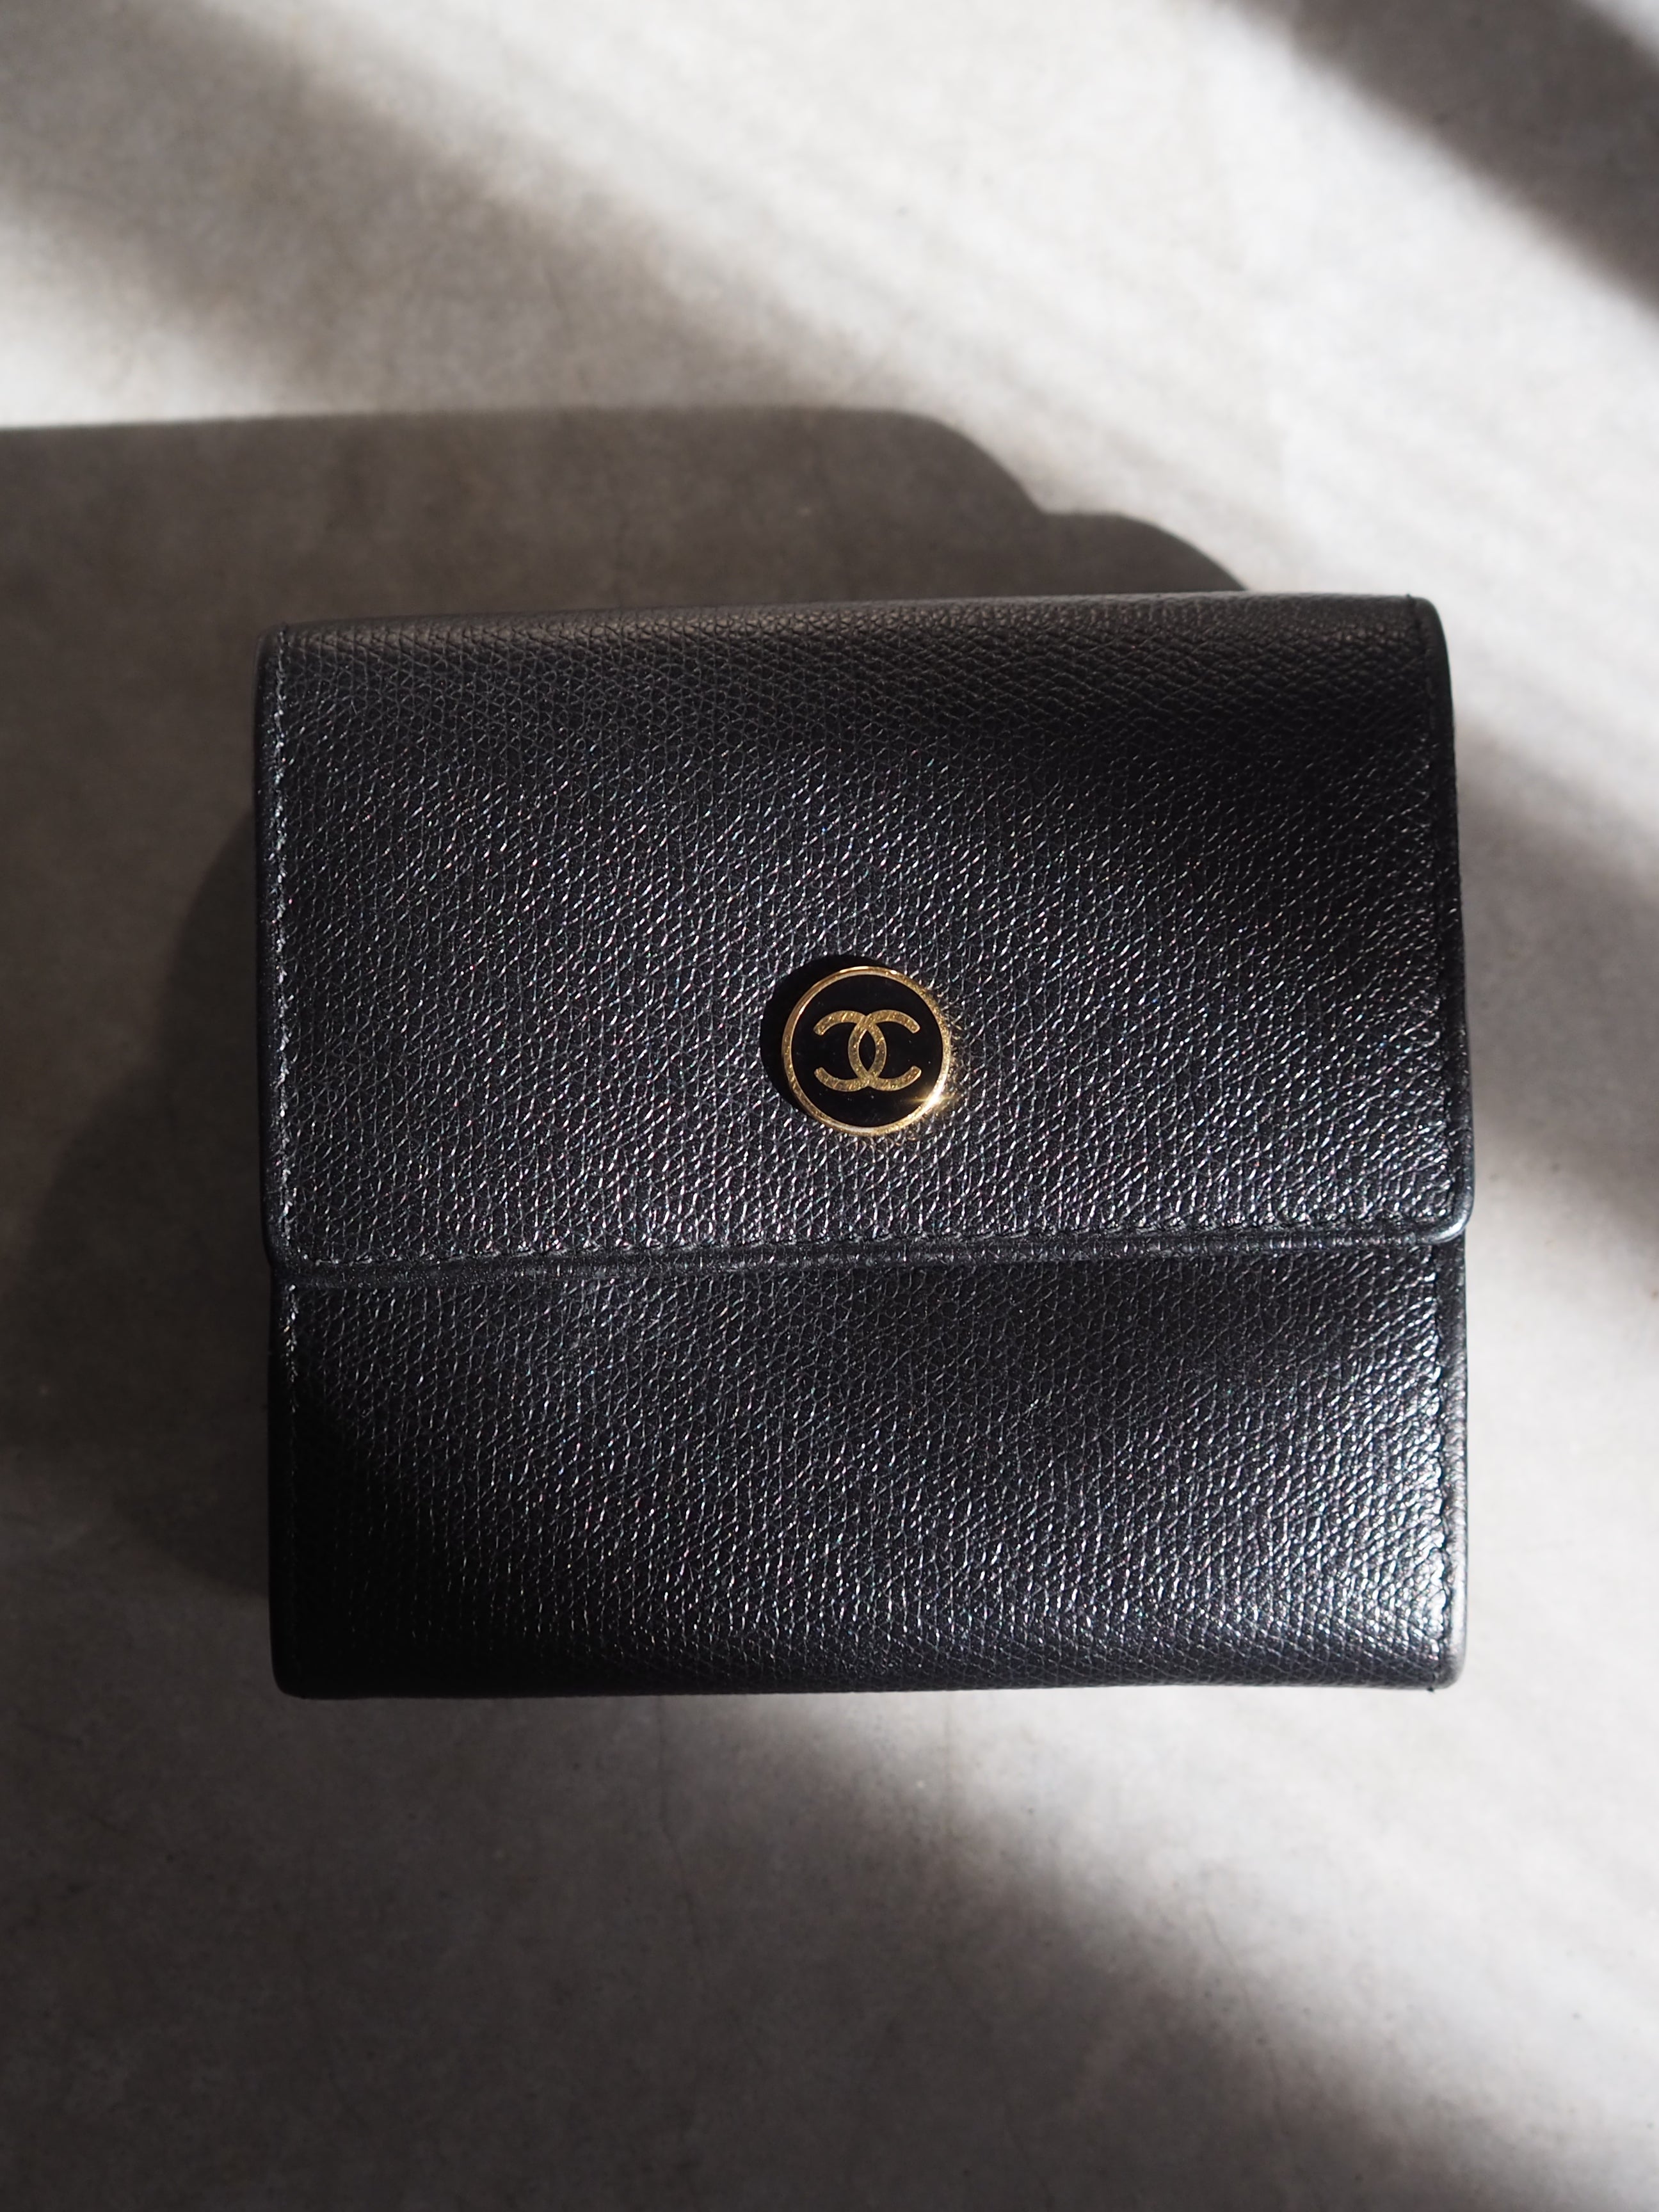 CHANEL Coco Button Compact Wallet